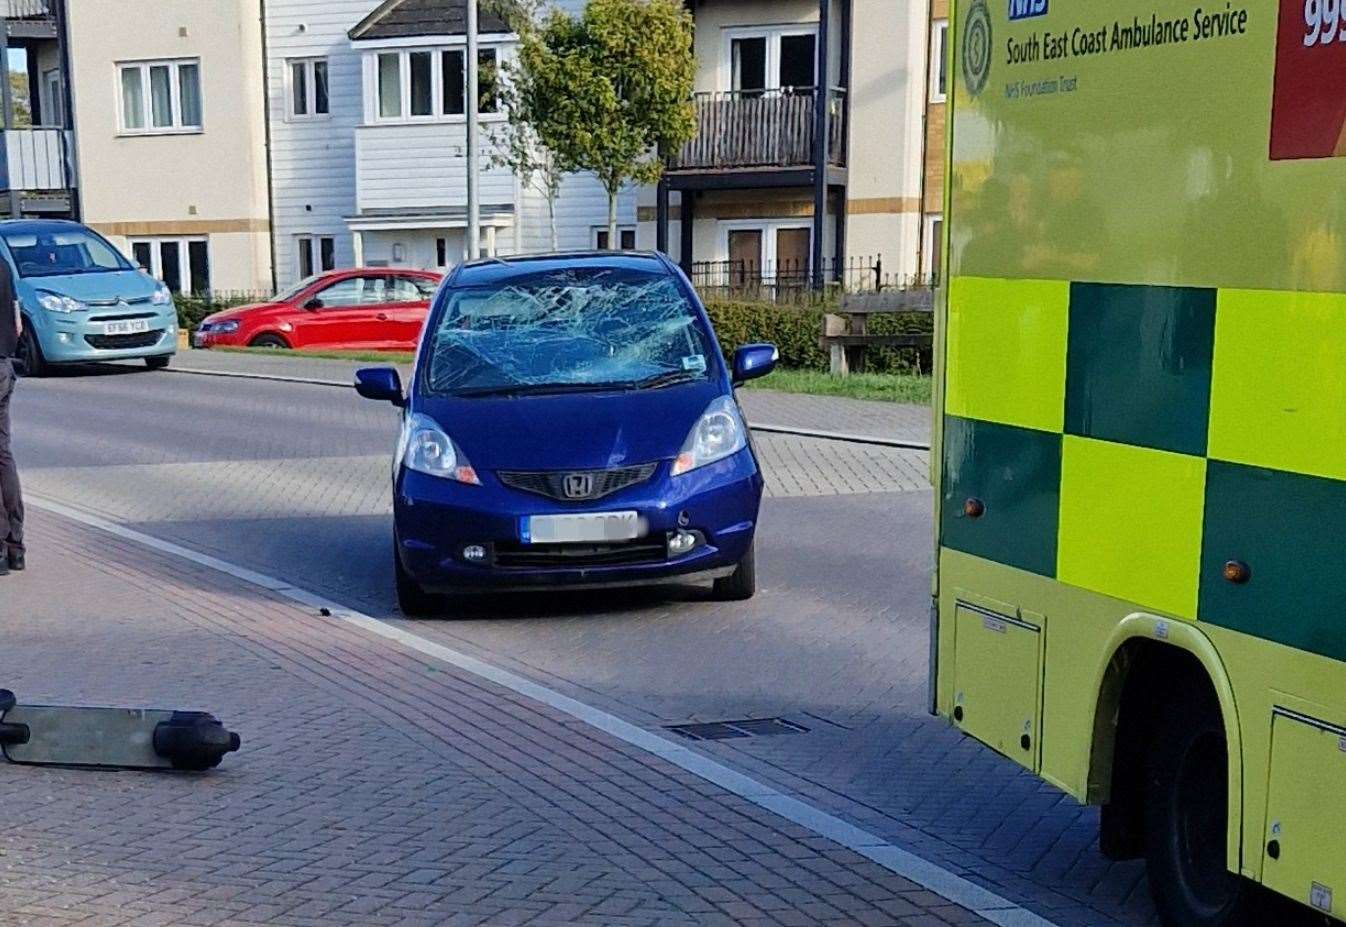 The crash between the e-scooter rider and car happened in Laurens Van Der Post Way, Ashford. Picture: Andrew Standing